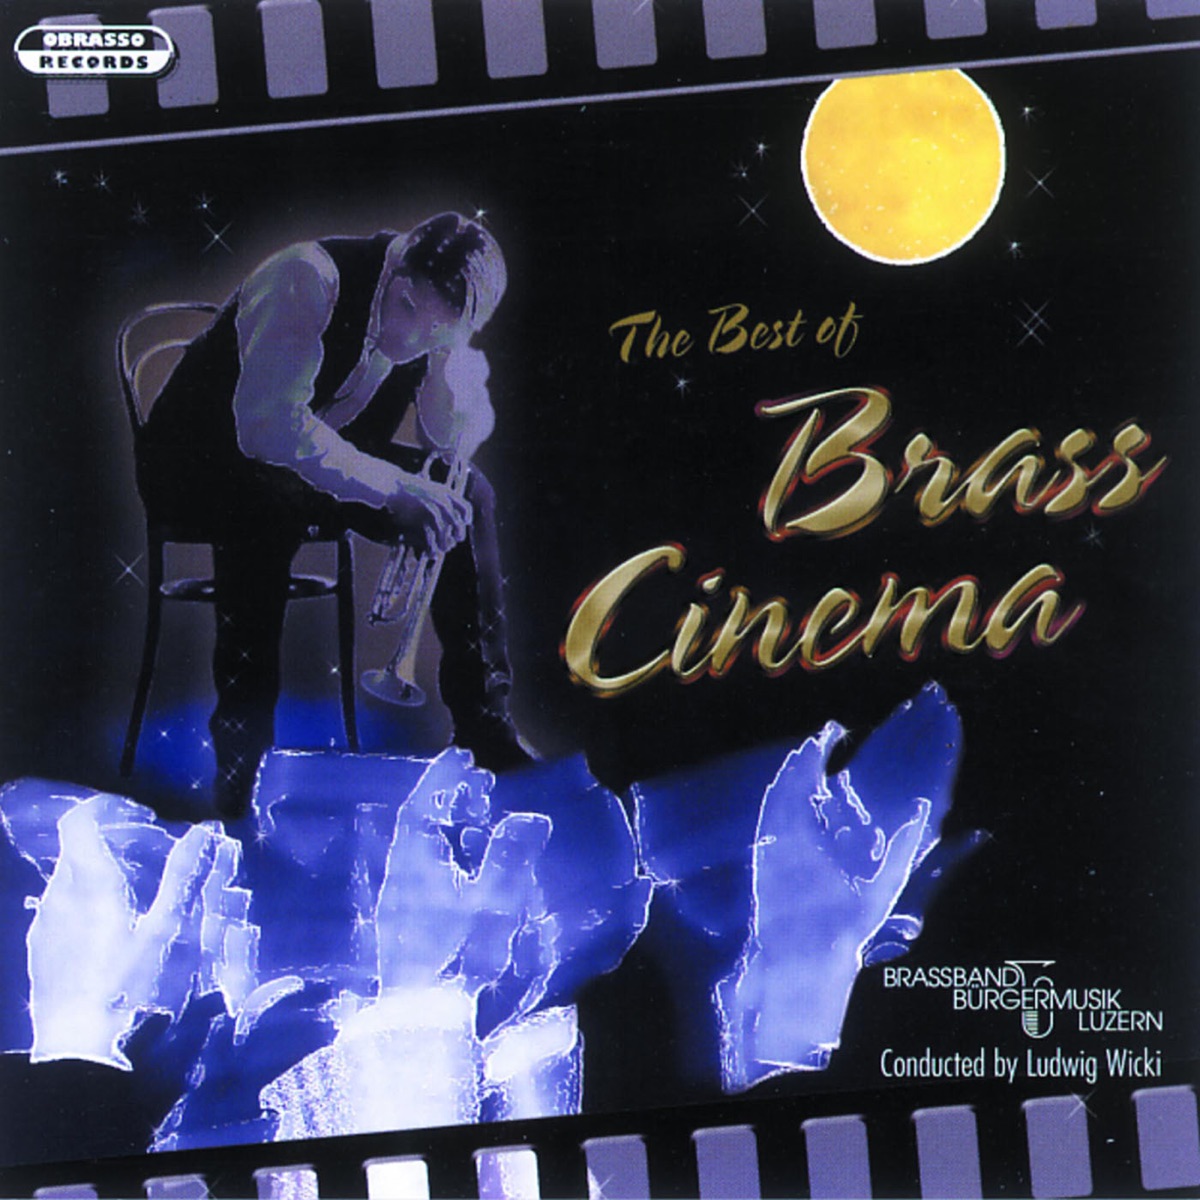 The Best of Brass Cinema (Music Inspired By the Film) - Album by